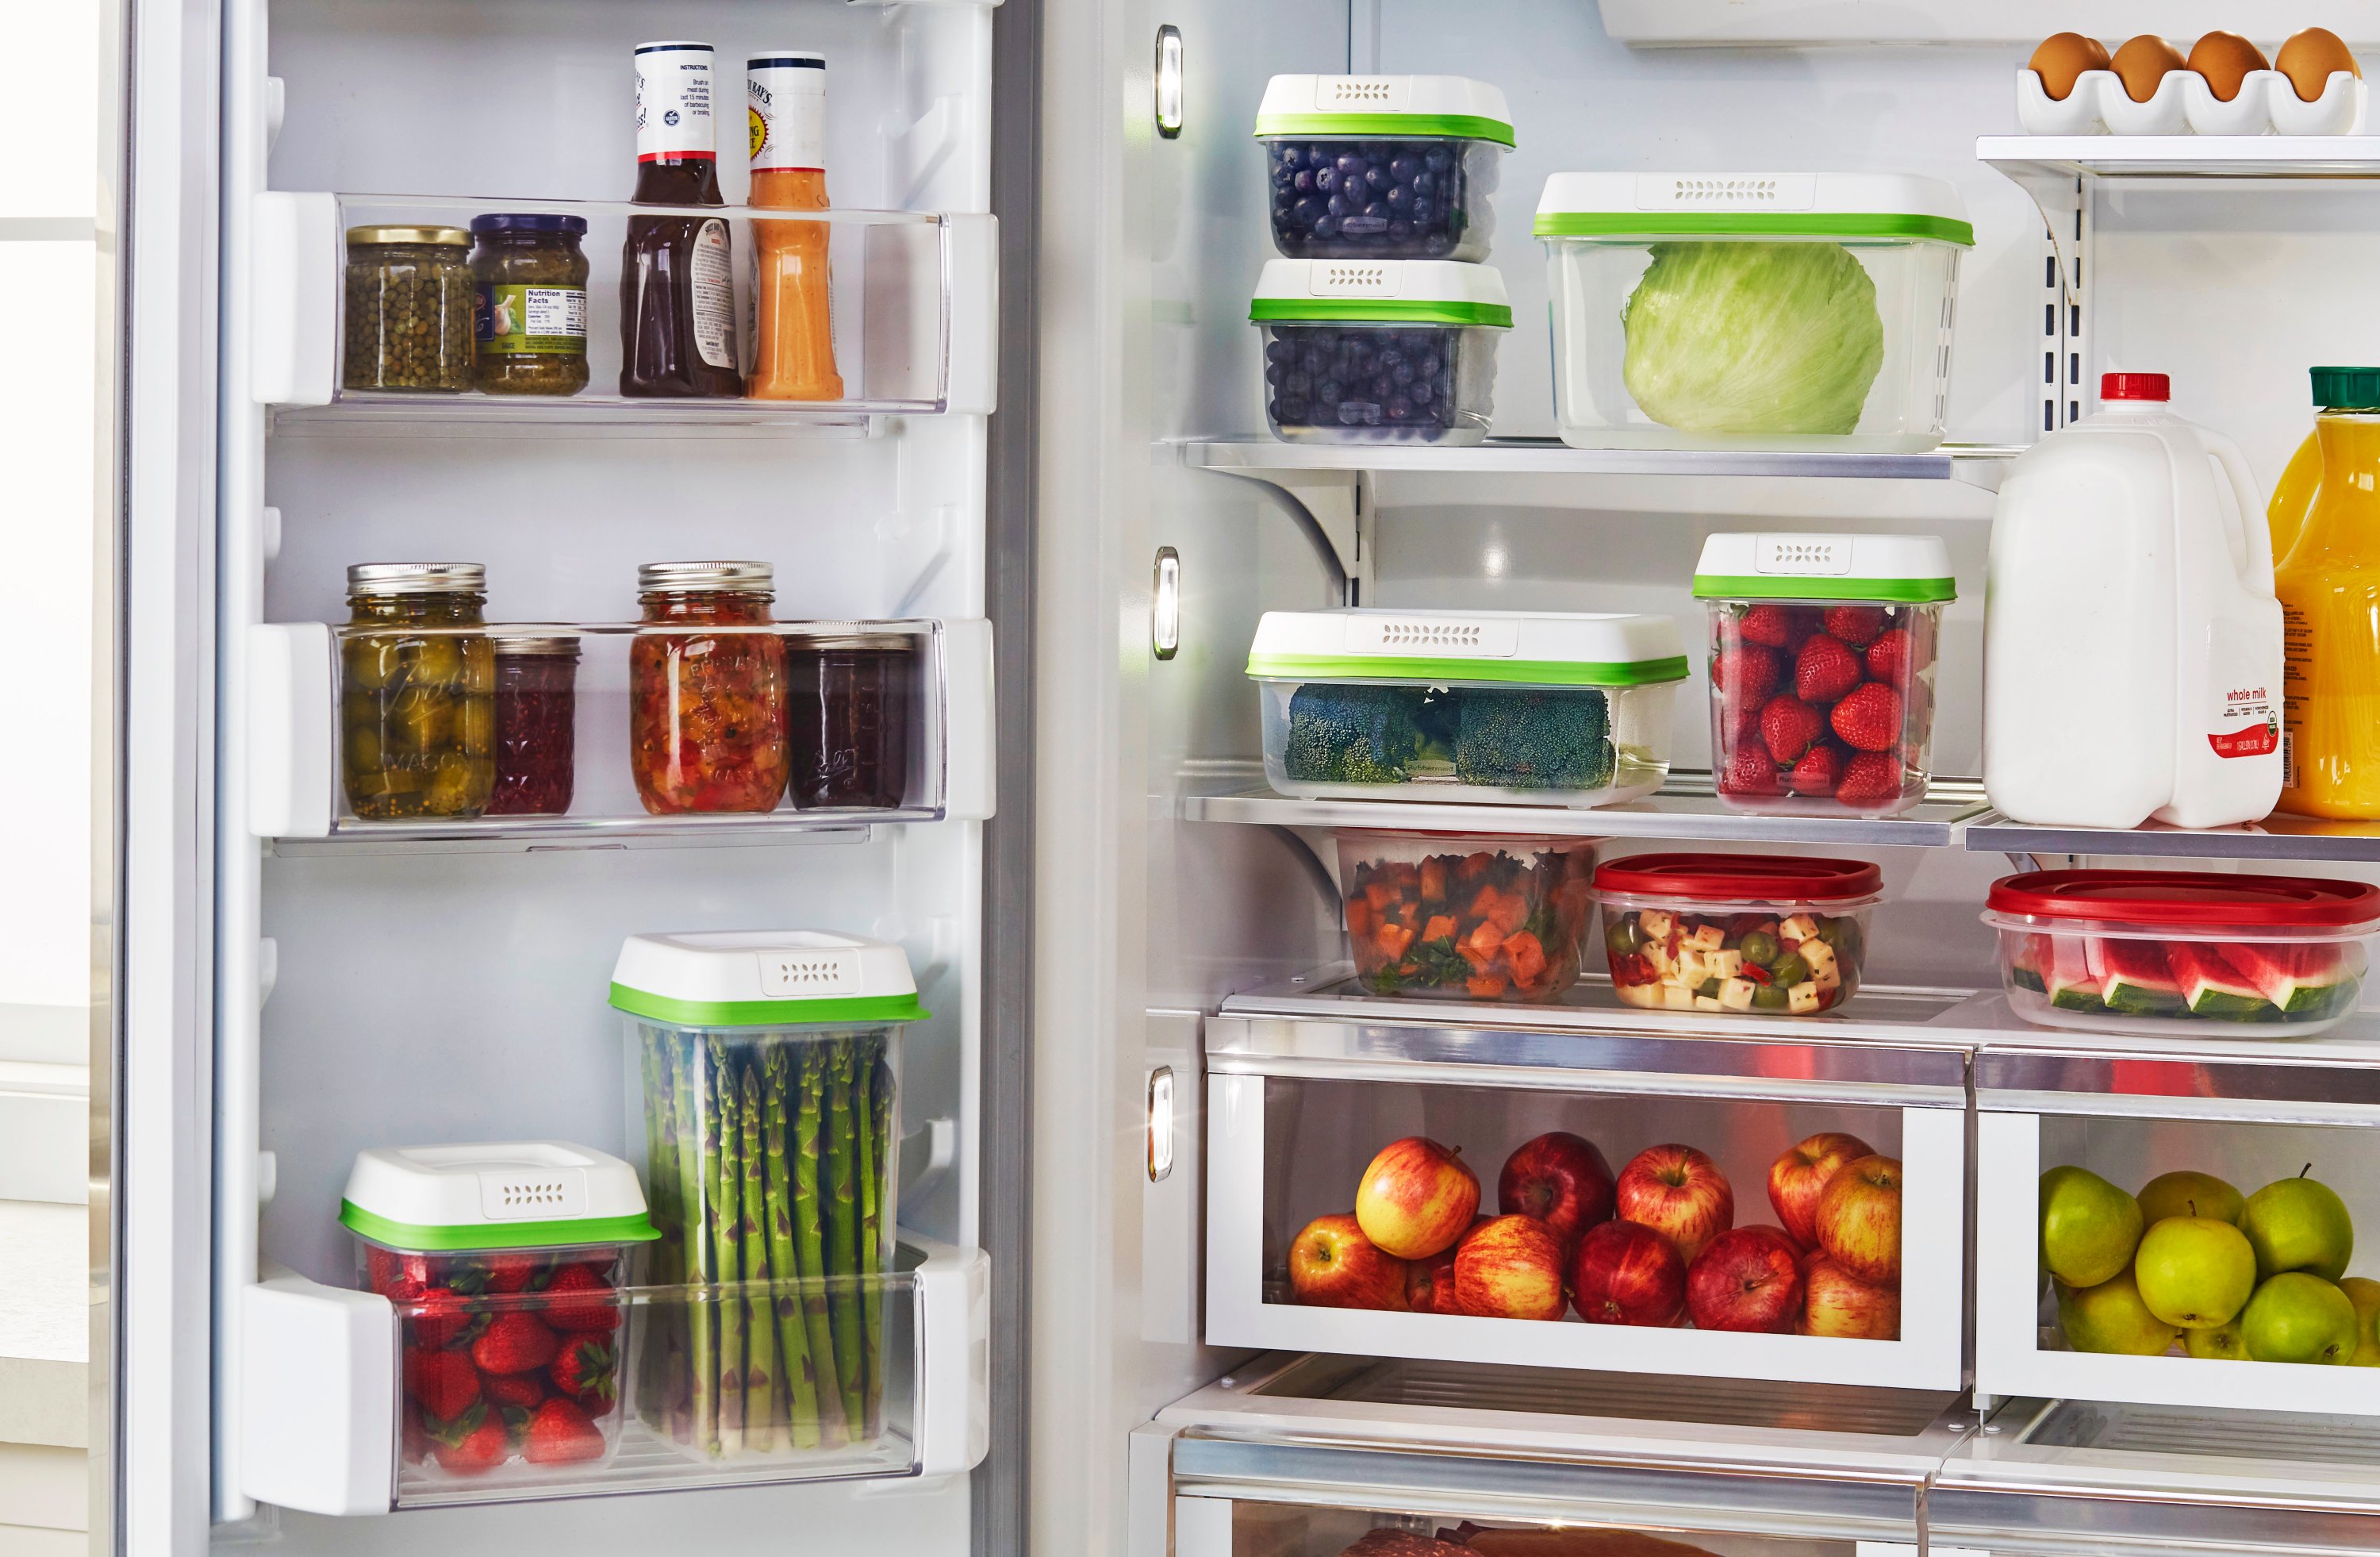 https://s7d9.scene7.com/is/image/NewellRubbermaid/SAP-rubbermaid-food-storage-green-5pk-1MS-1M-1MT-1LS-1L-group-in-fridge-with-food-lifestyle-2